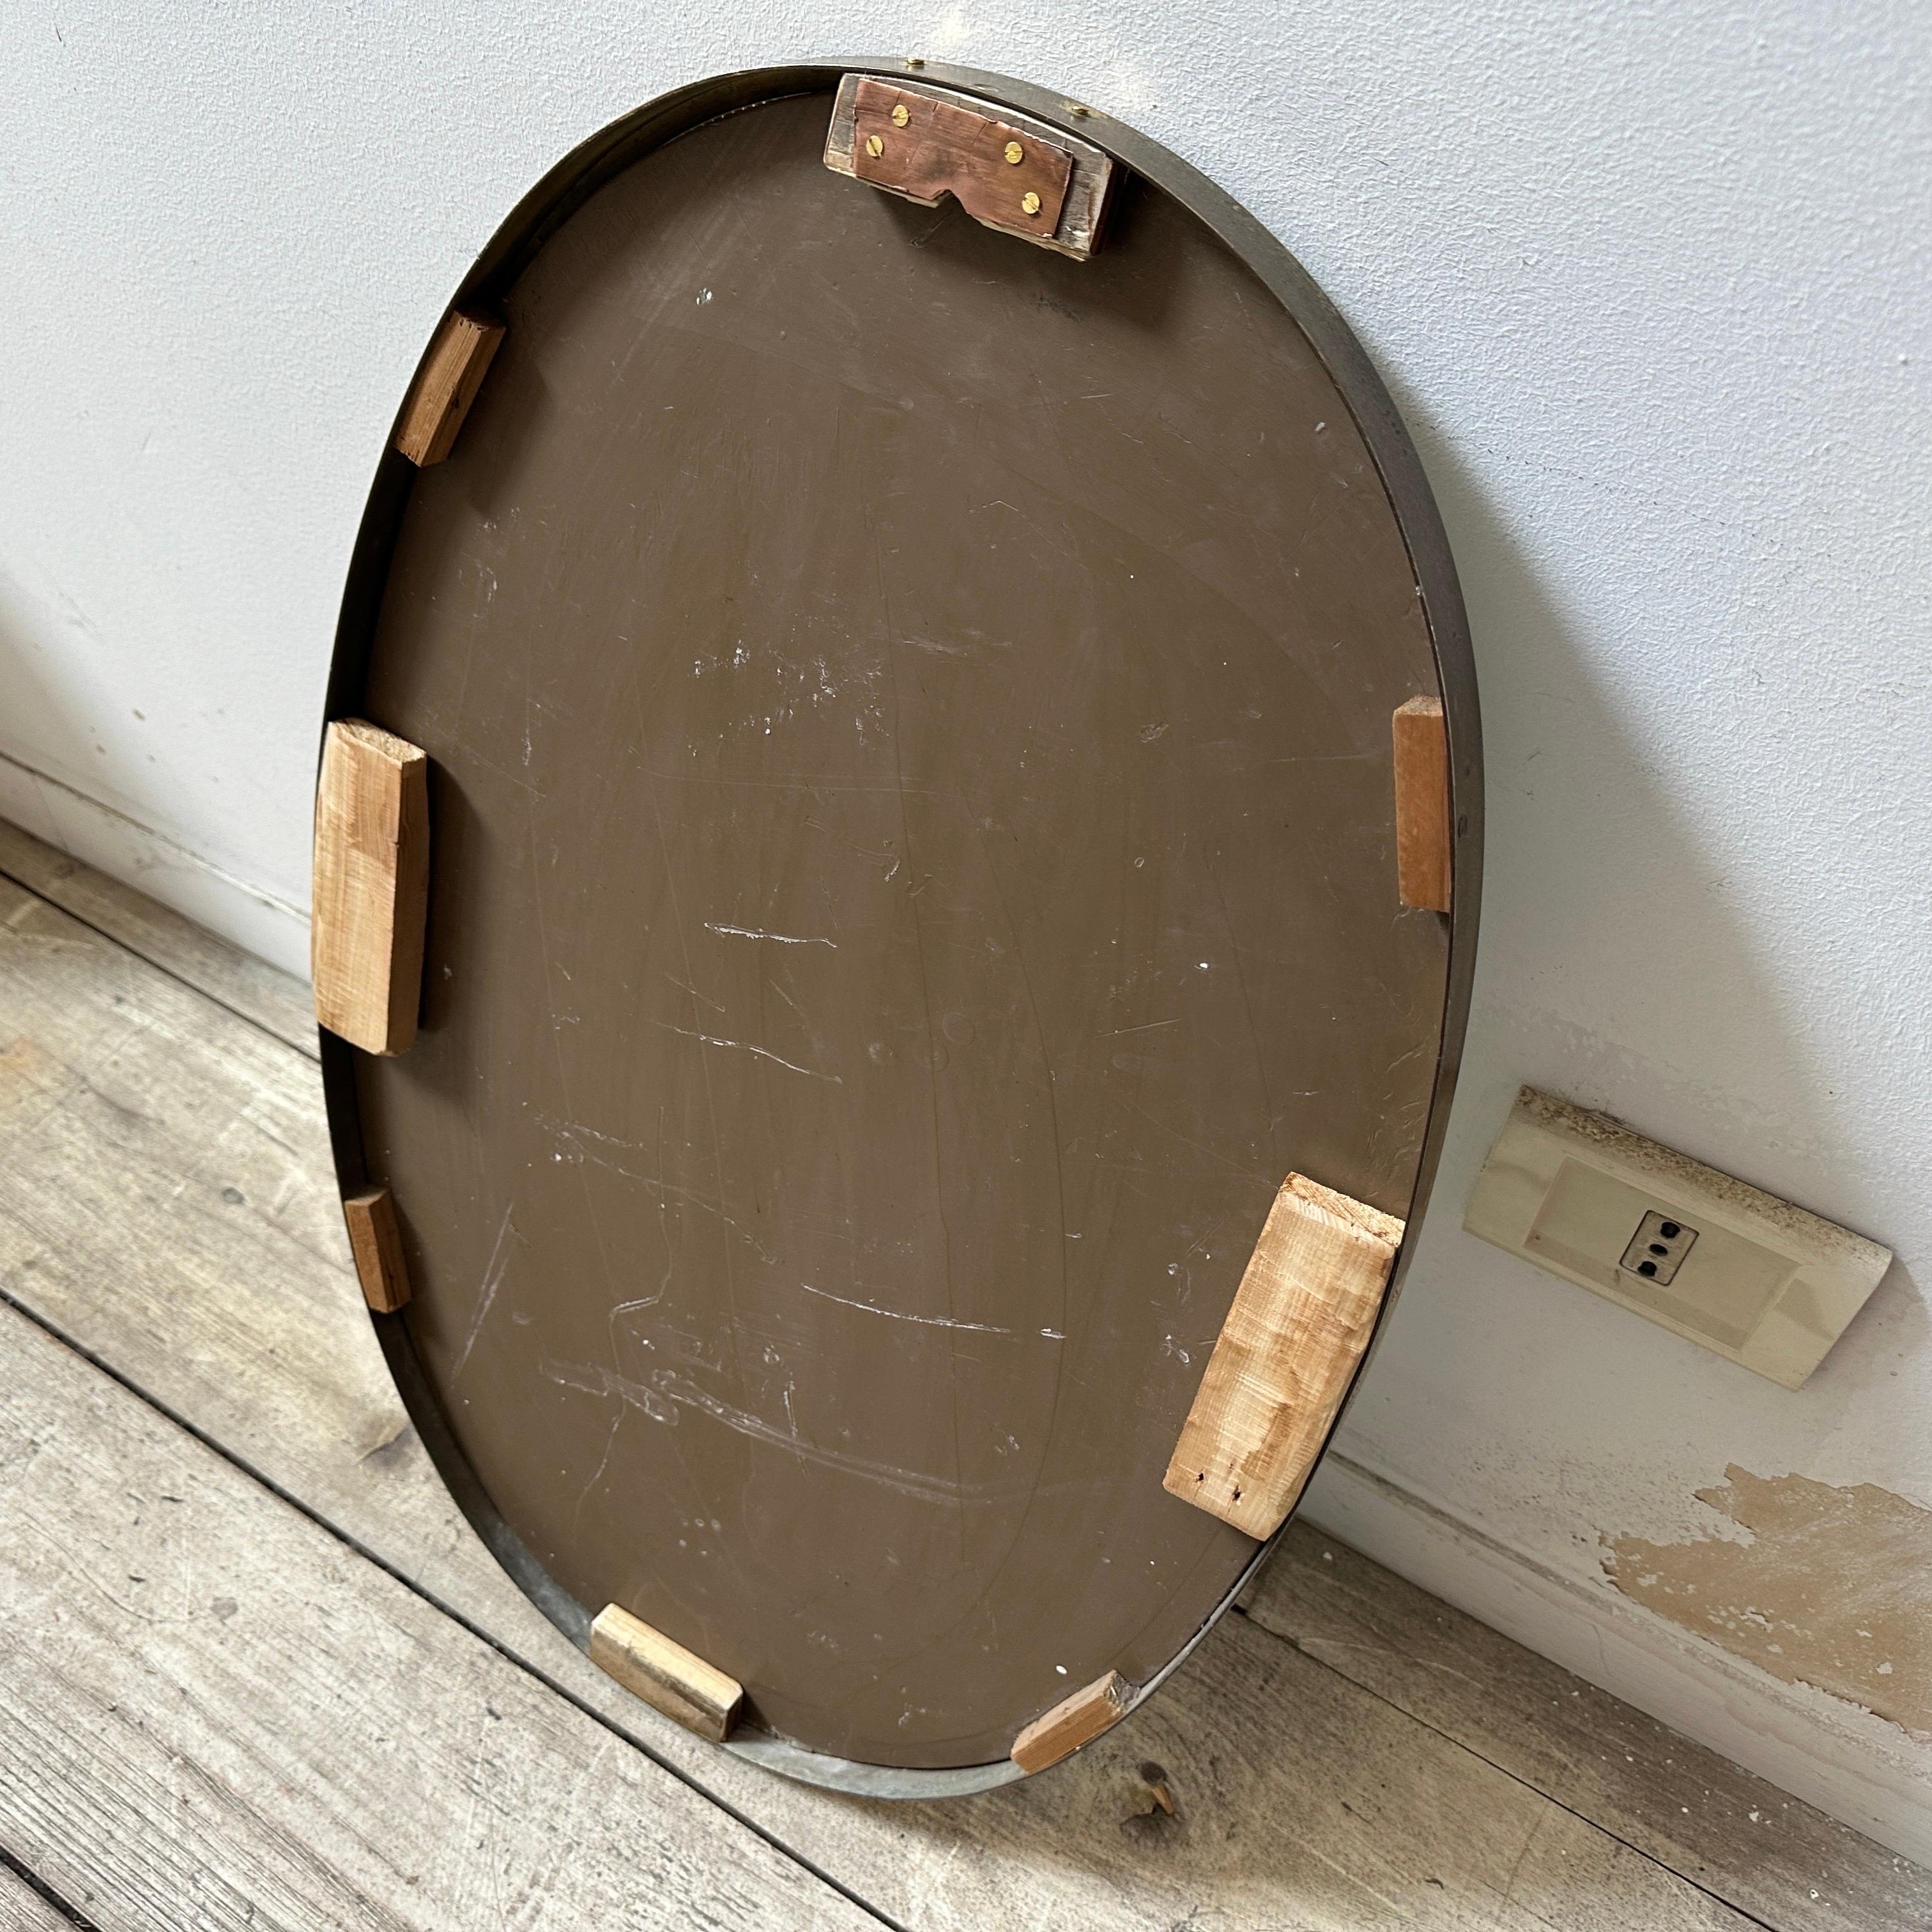 A solid brass oval wall mirror designed and manufactured in Italy in the Fifties, brass it's in original patina and has signs of use and age, mirror glass is the original one. The 1950s was a period of great creativity and innovation in the world of